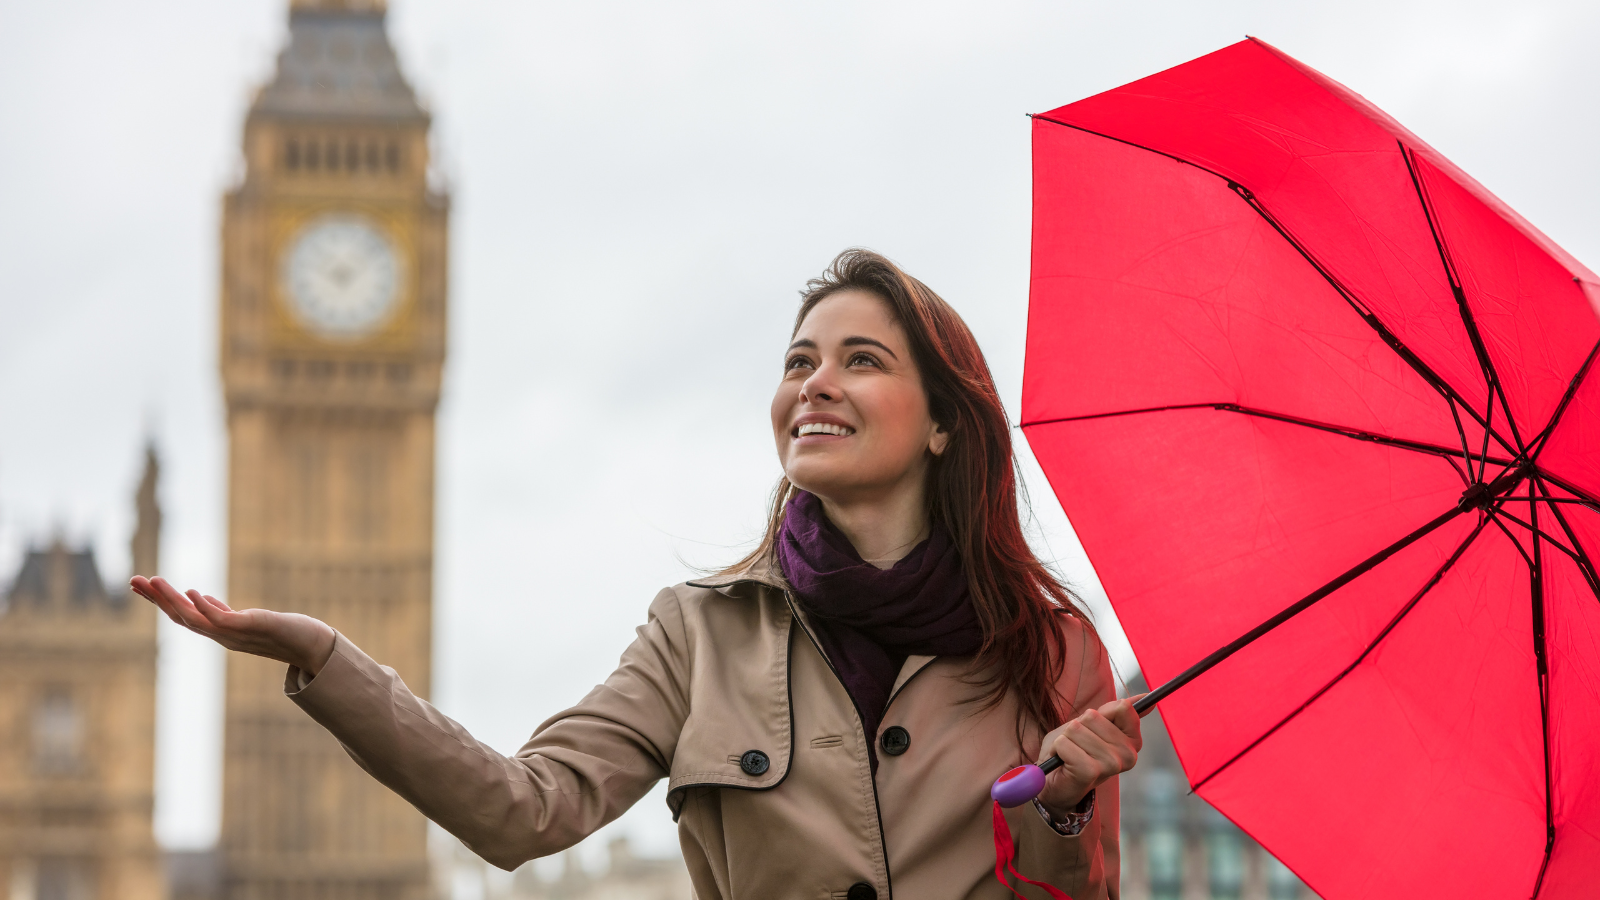 A young woman holding a red umbrella and checking for rain with Big Ben in the background.